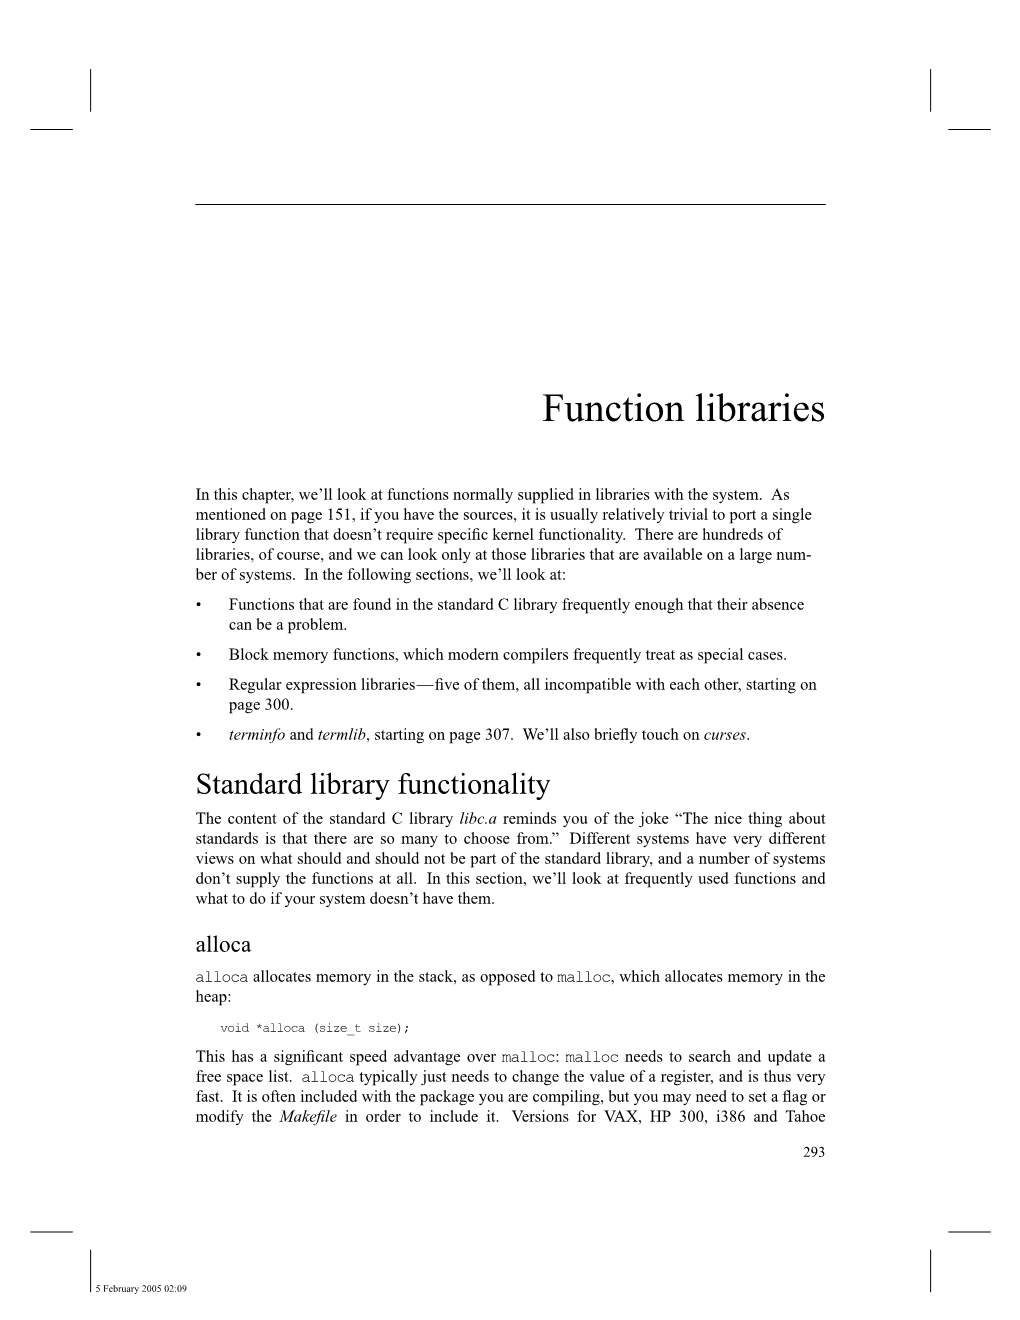 Chapter 18: Function Libraries 295